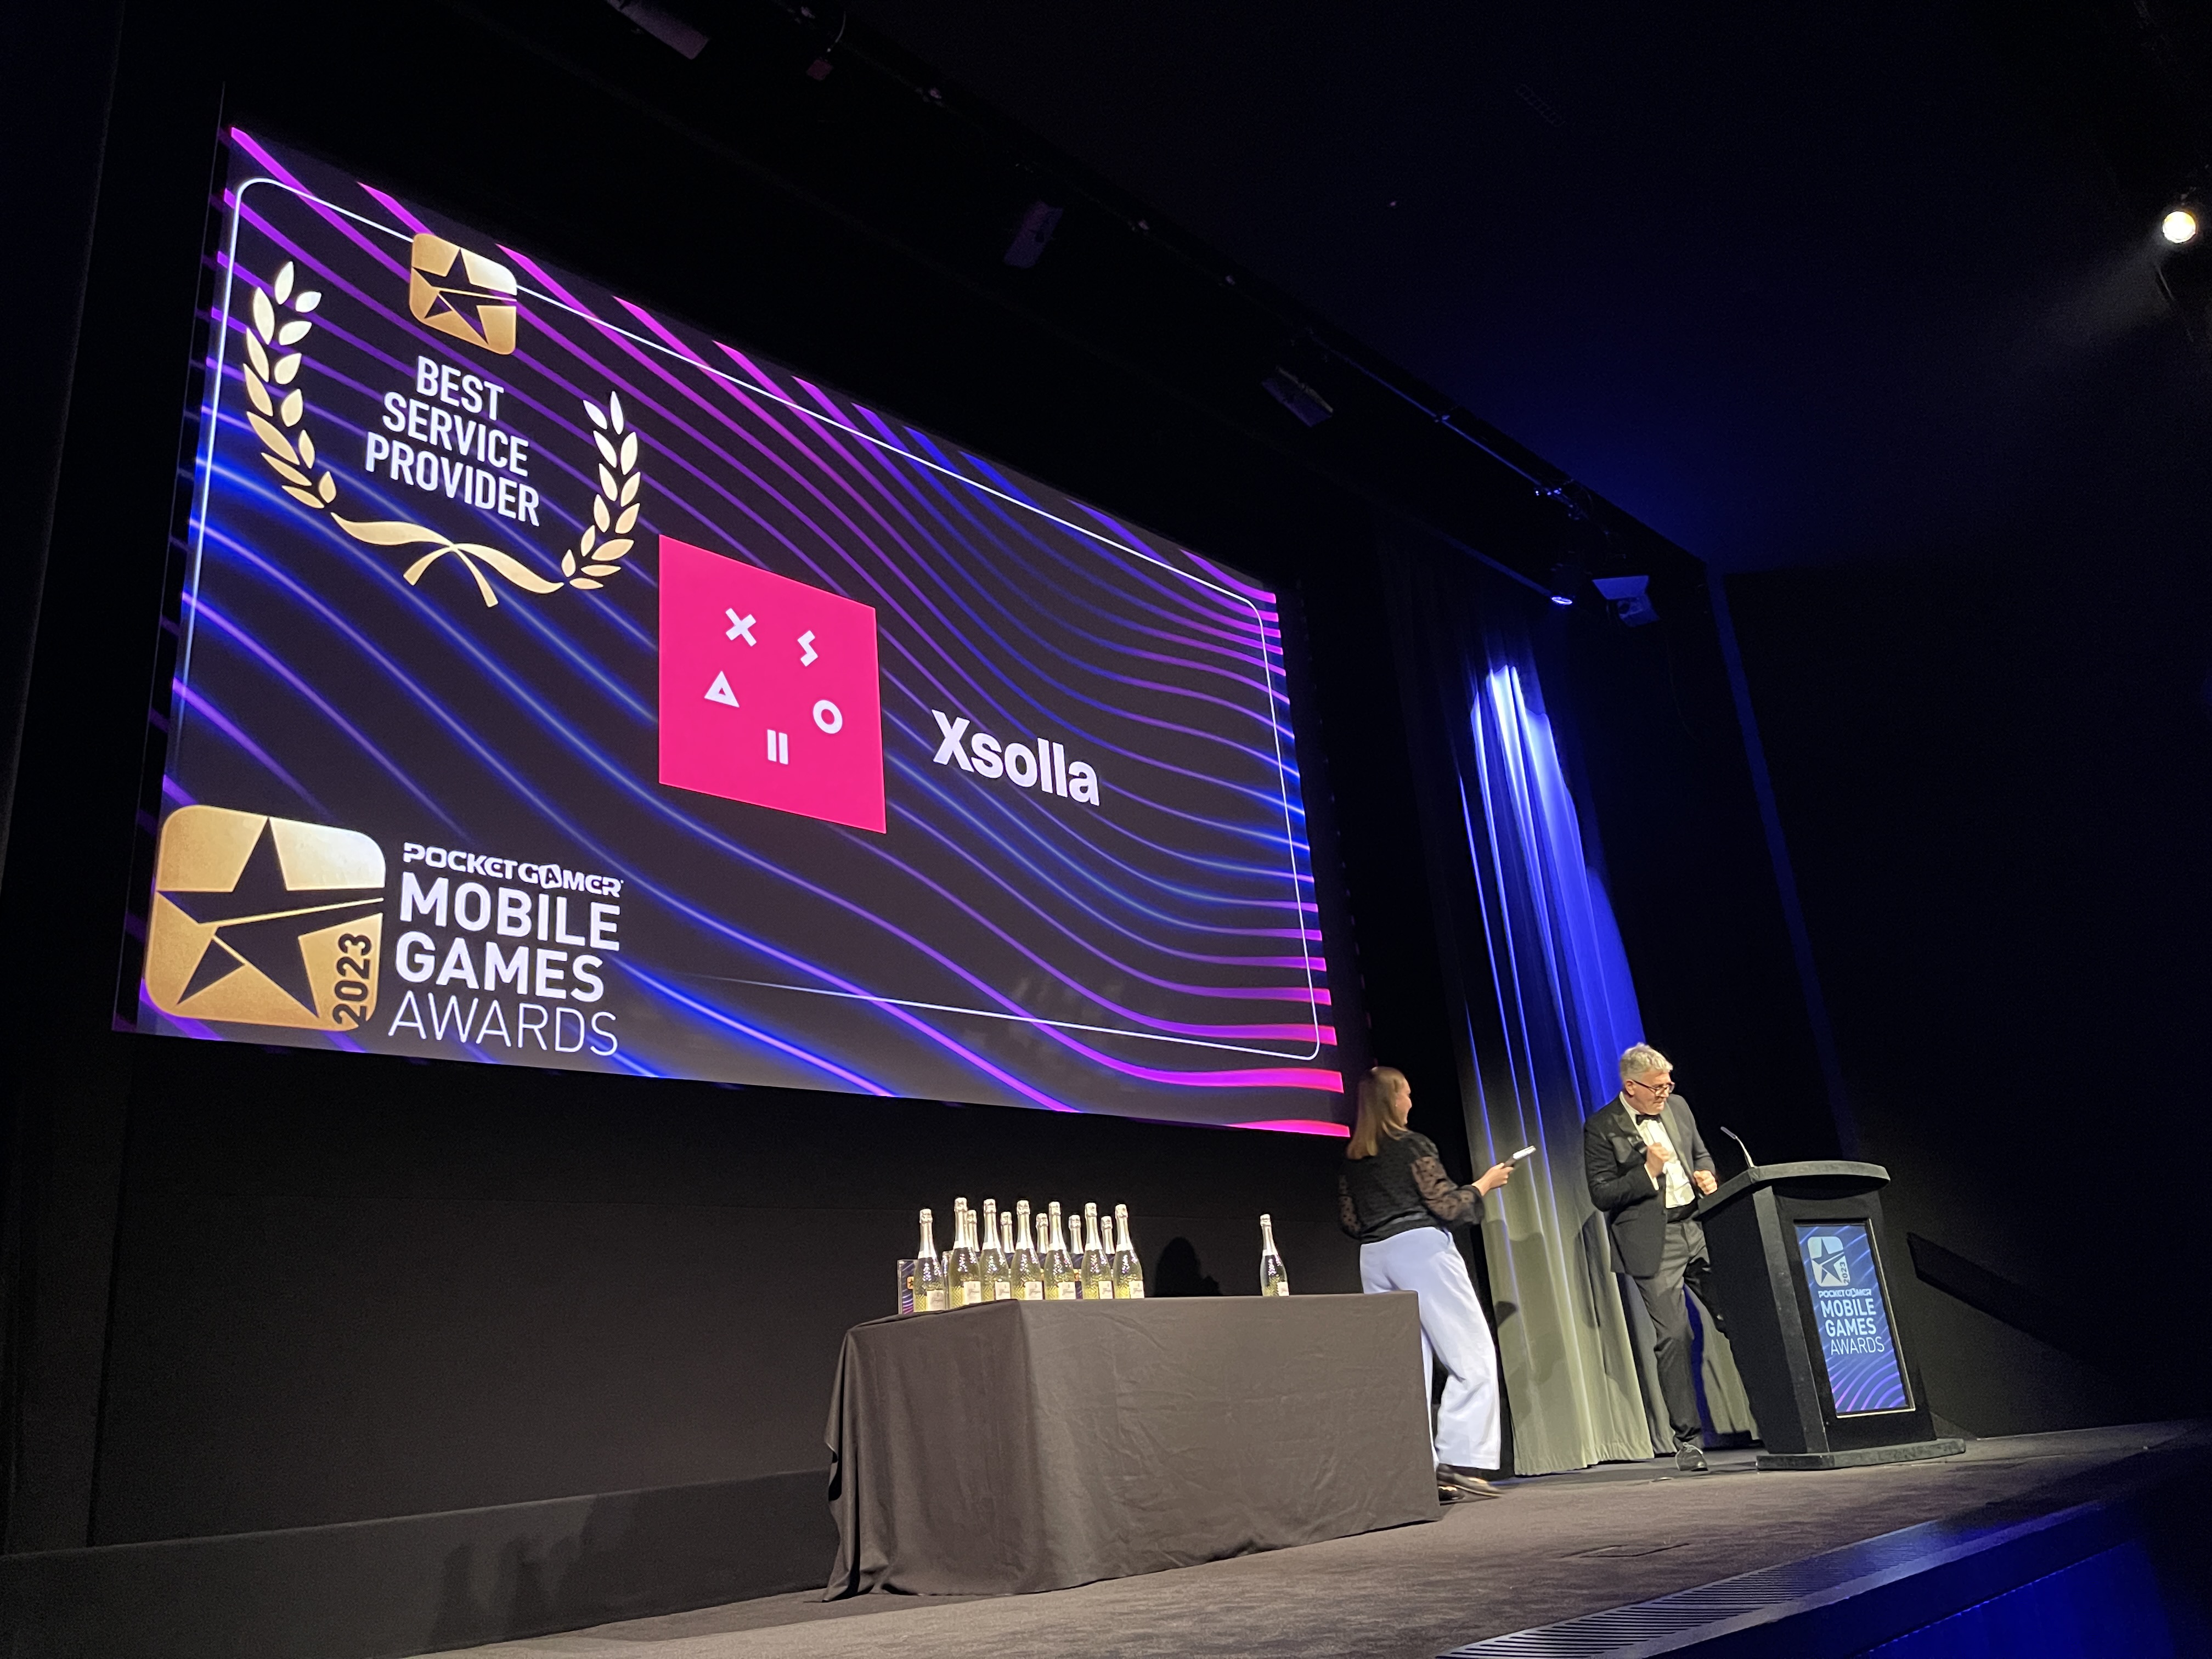 The winners of the Pocket Gamer Mobile Games Awards 2022